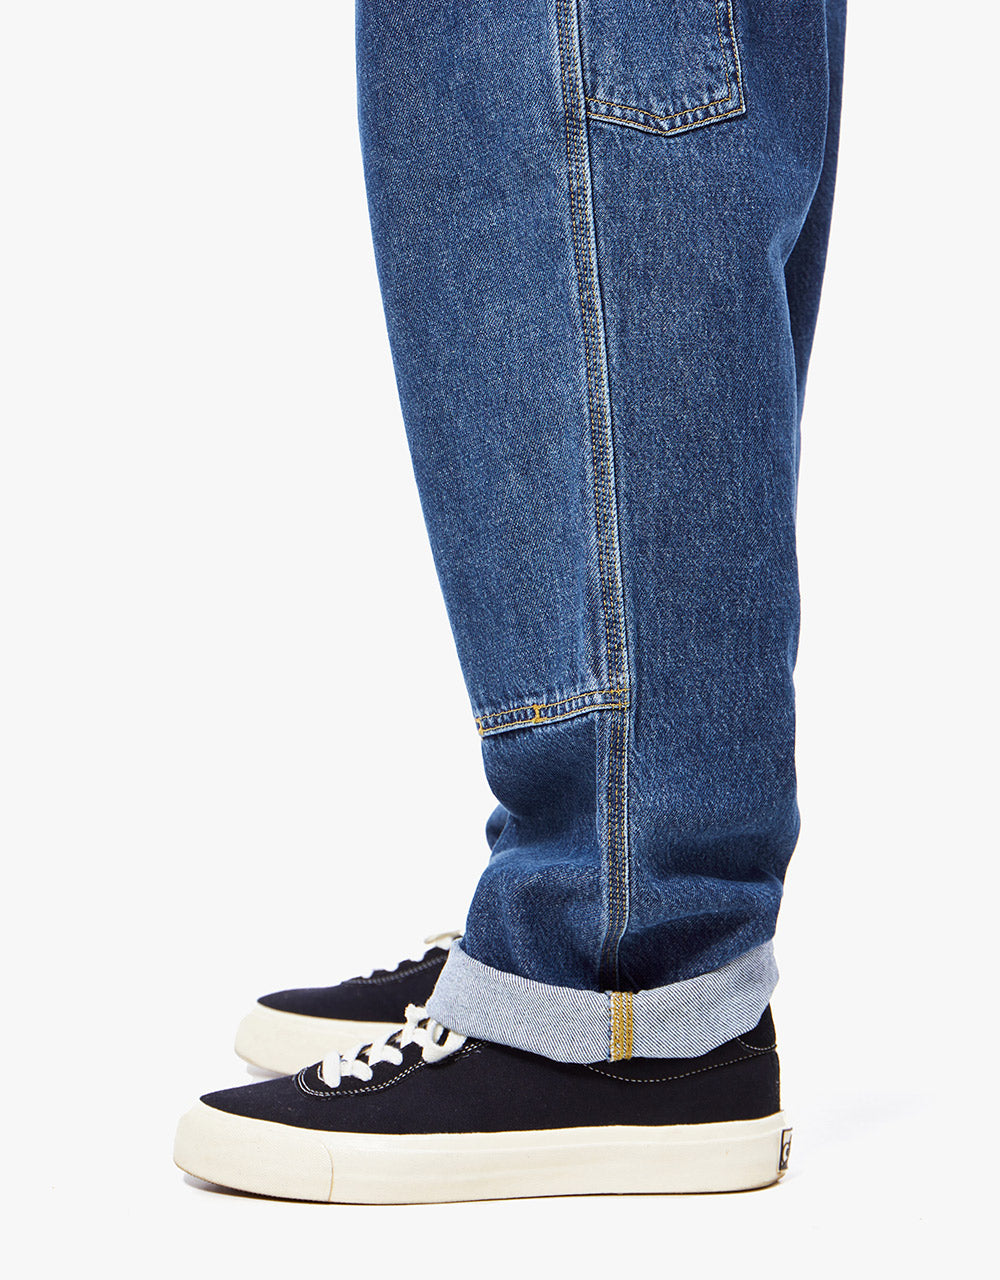 Carhartt WIP Double Knee Pant - Blue (Stone Washed)